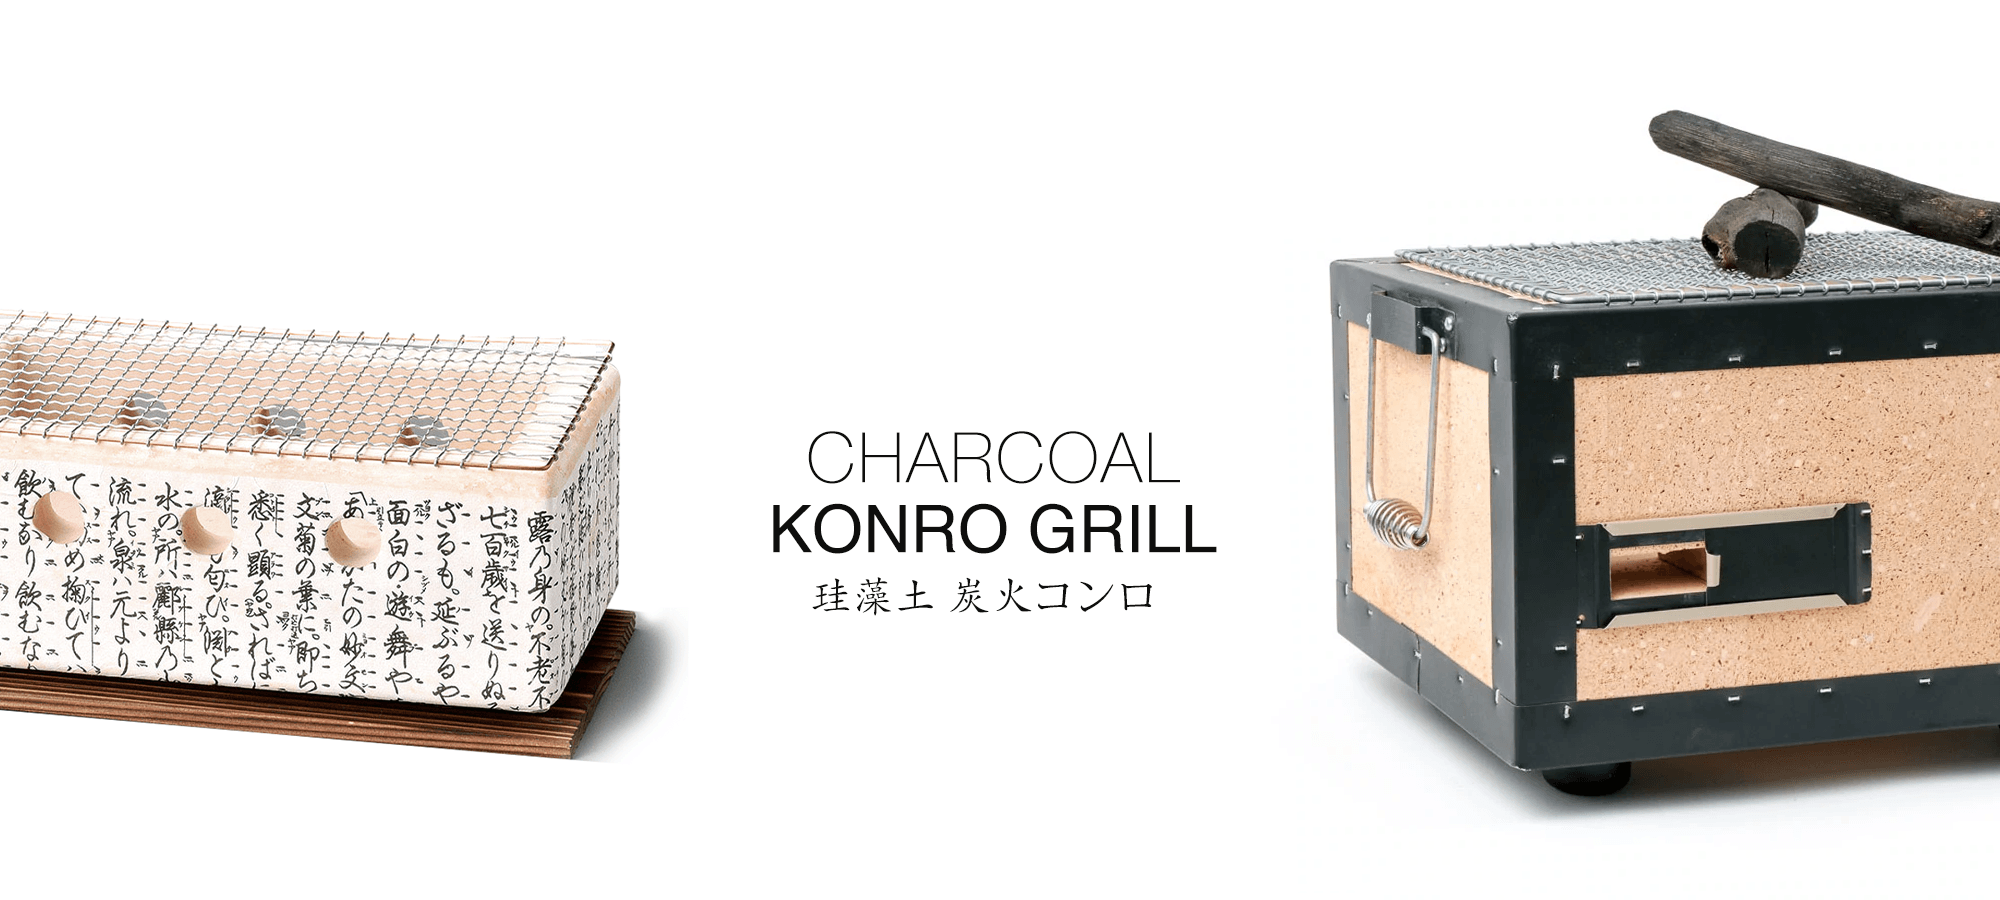 This is why our Japanese grills are known as konro grills, not hibachi grills. 